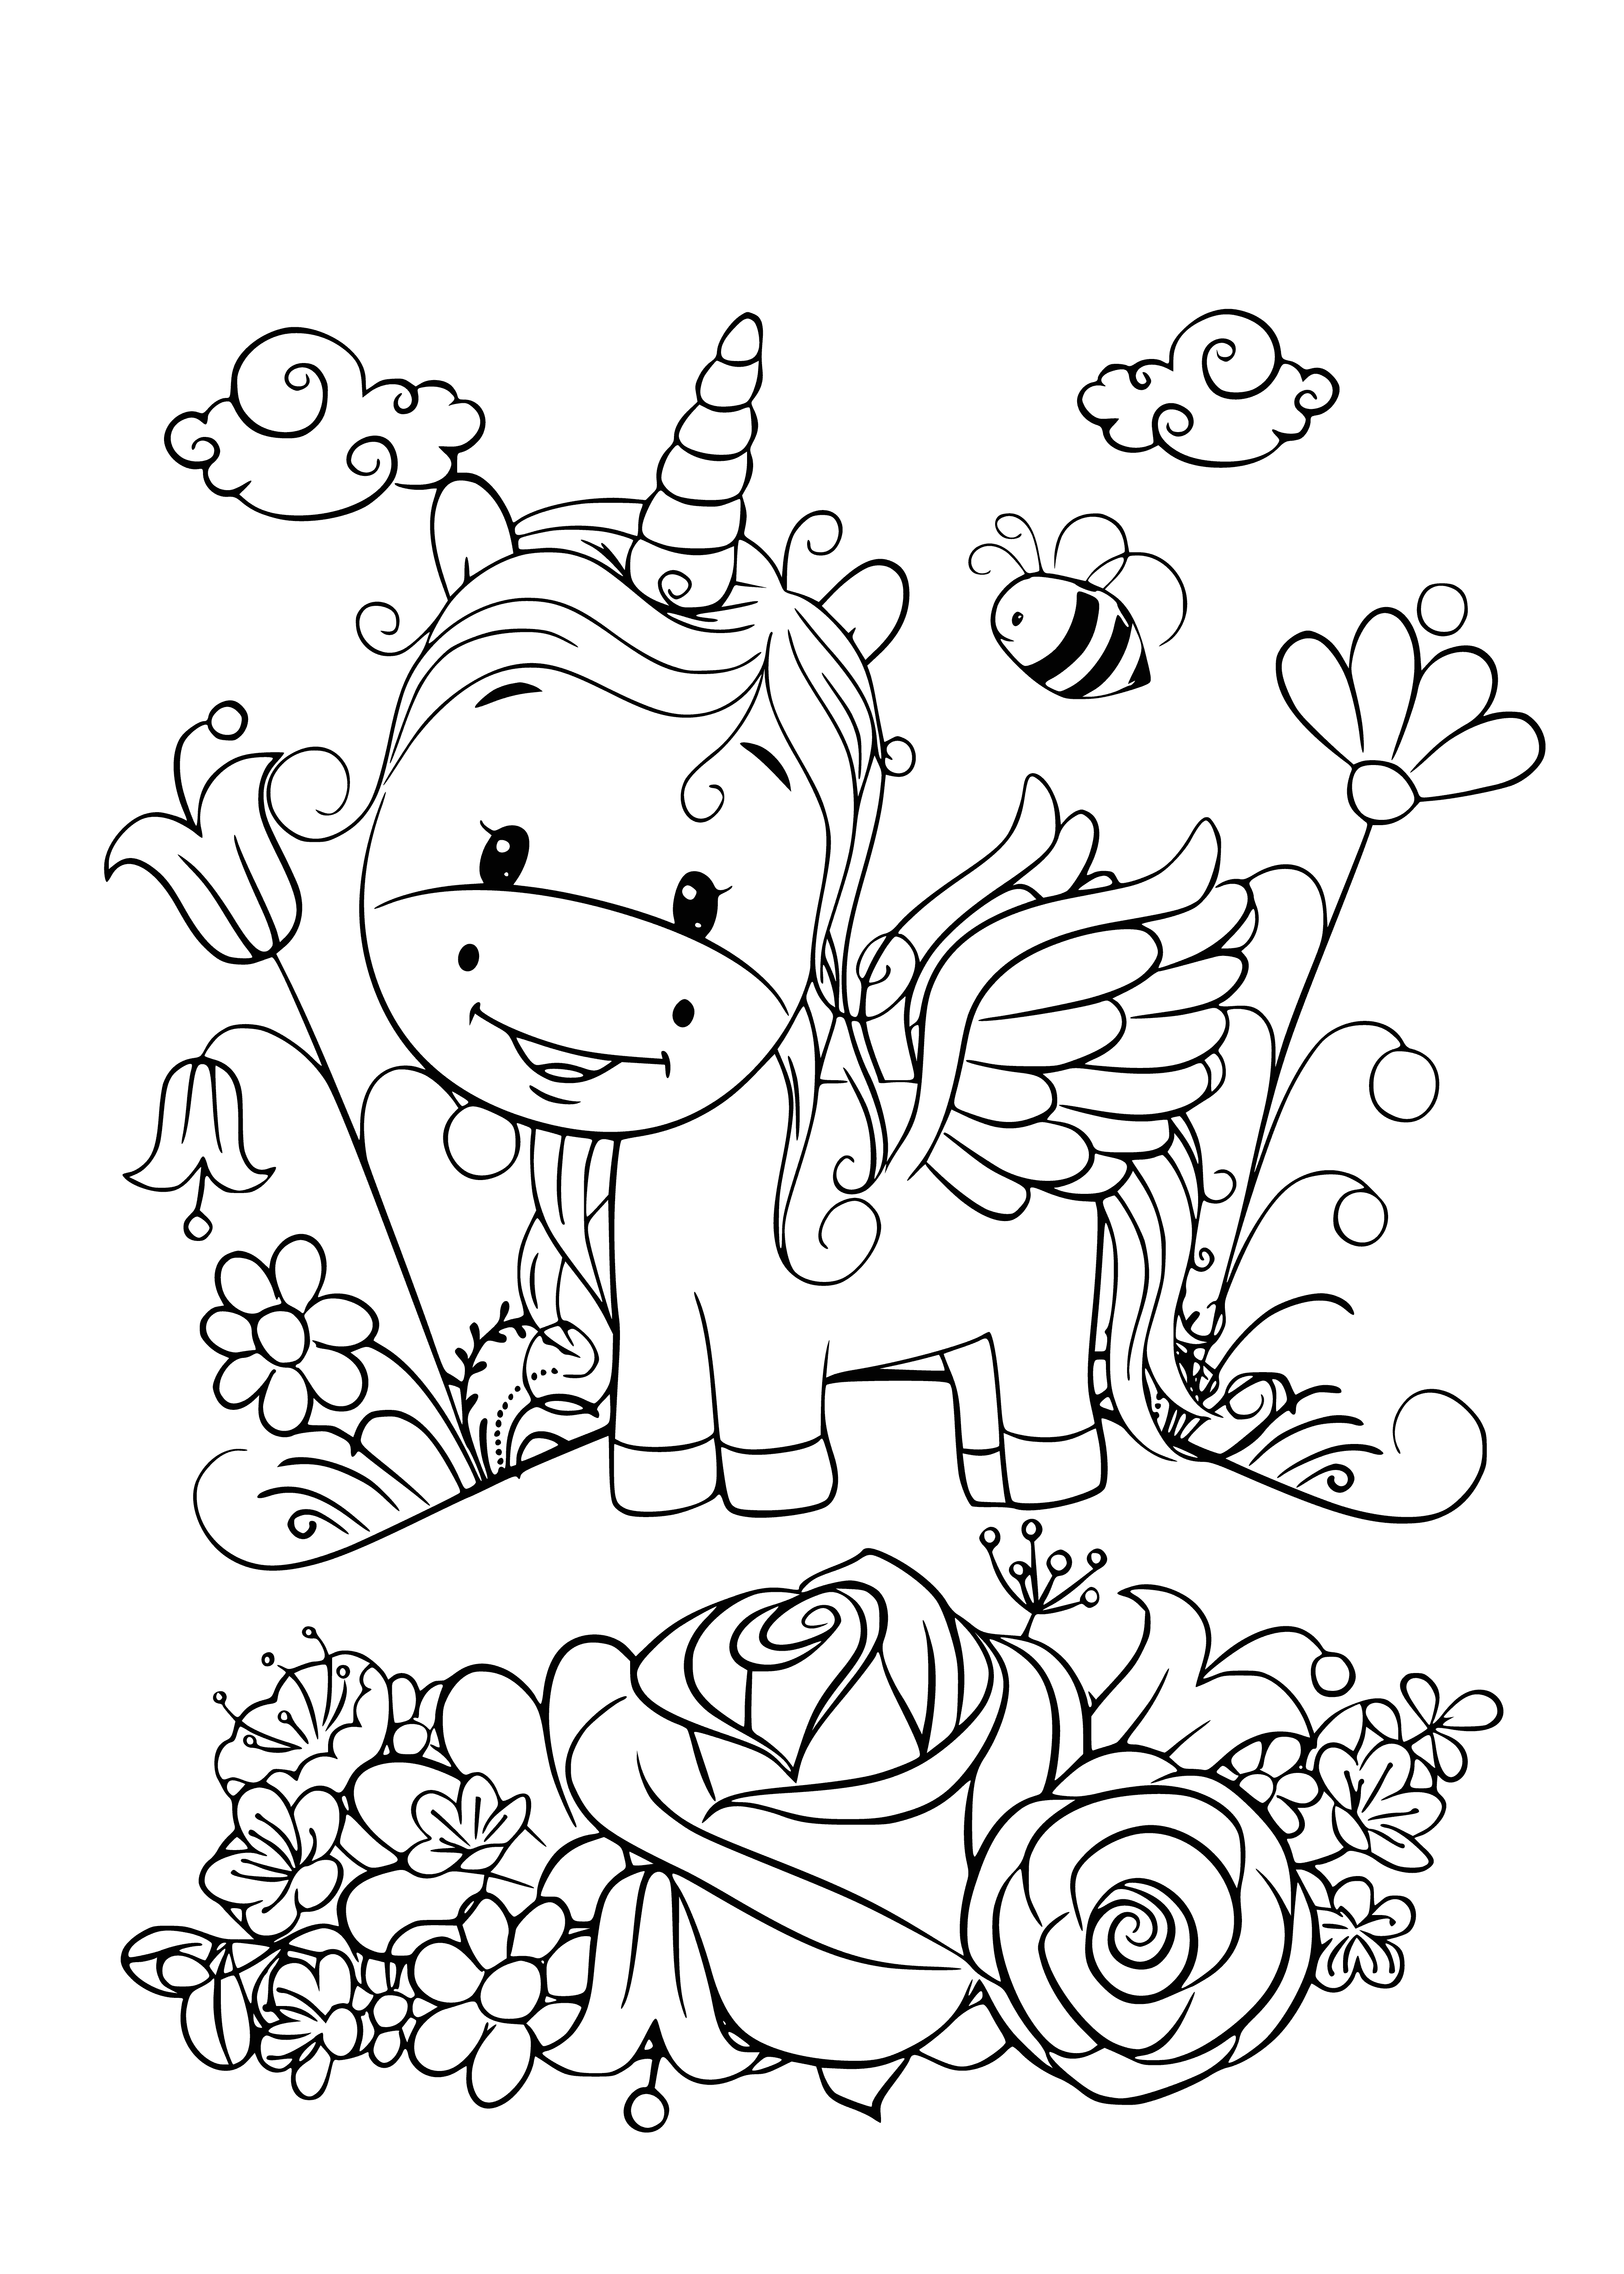 Unicorns in the meadow coloring page